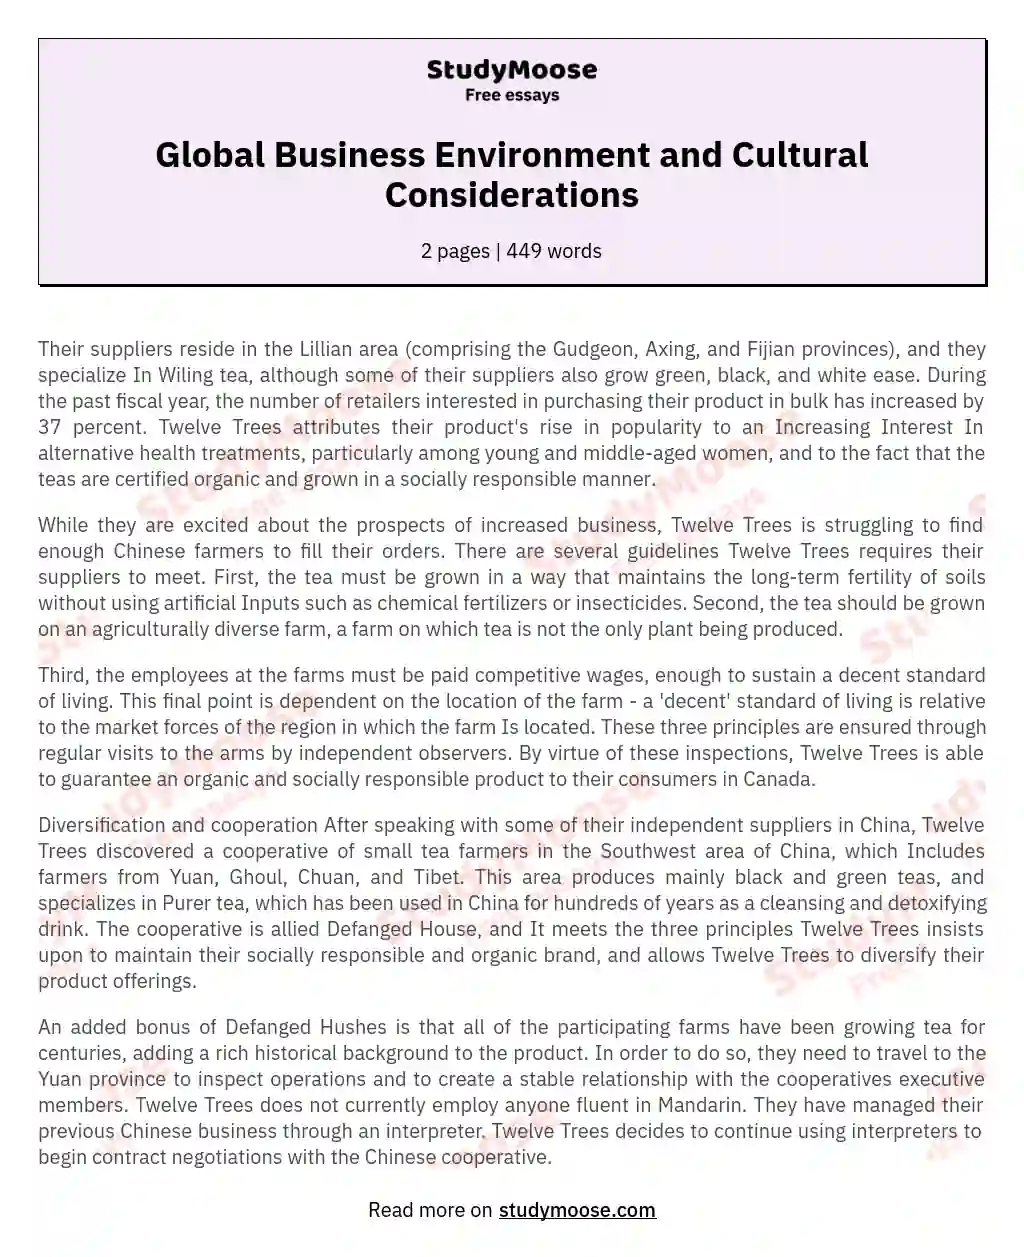 Global Business Environment and Cultural Considerations